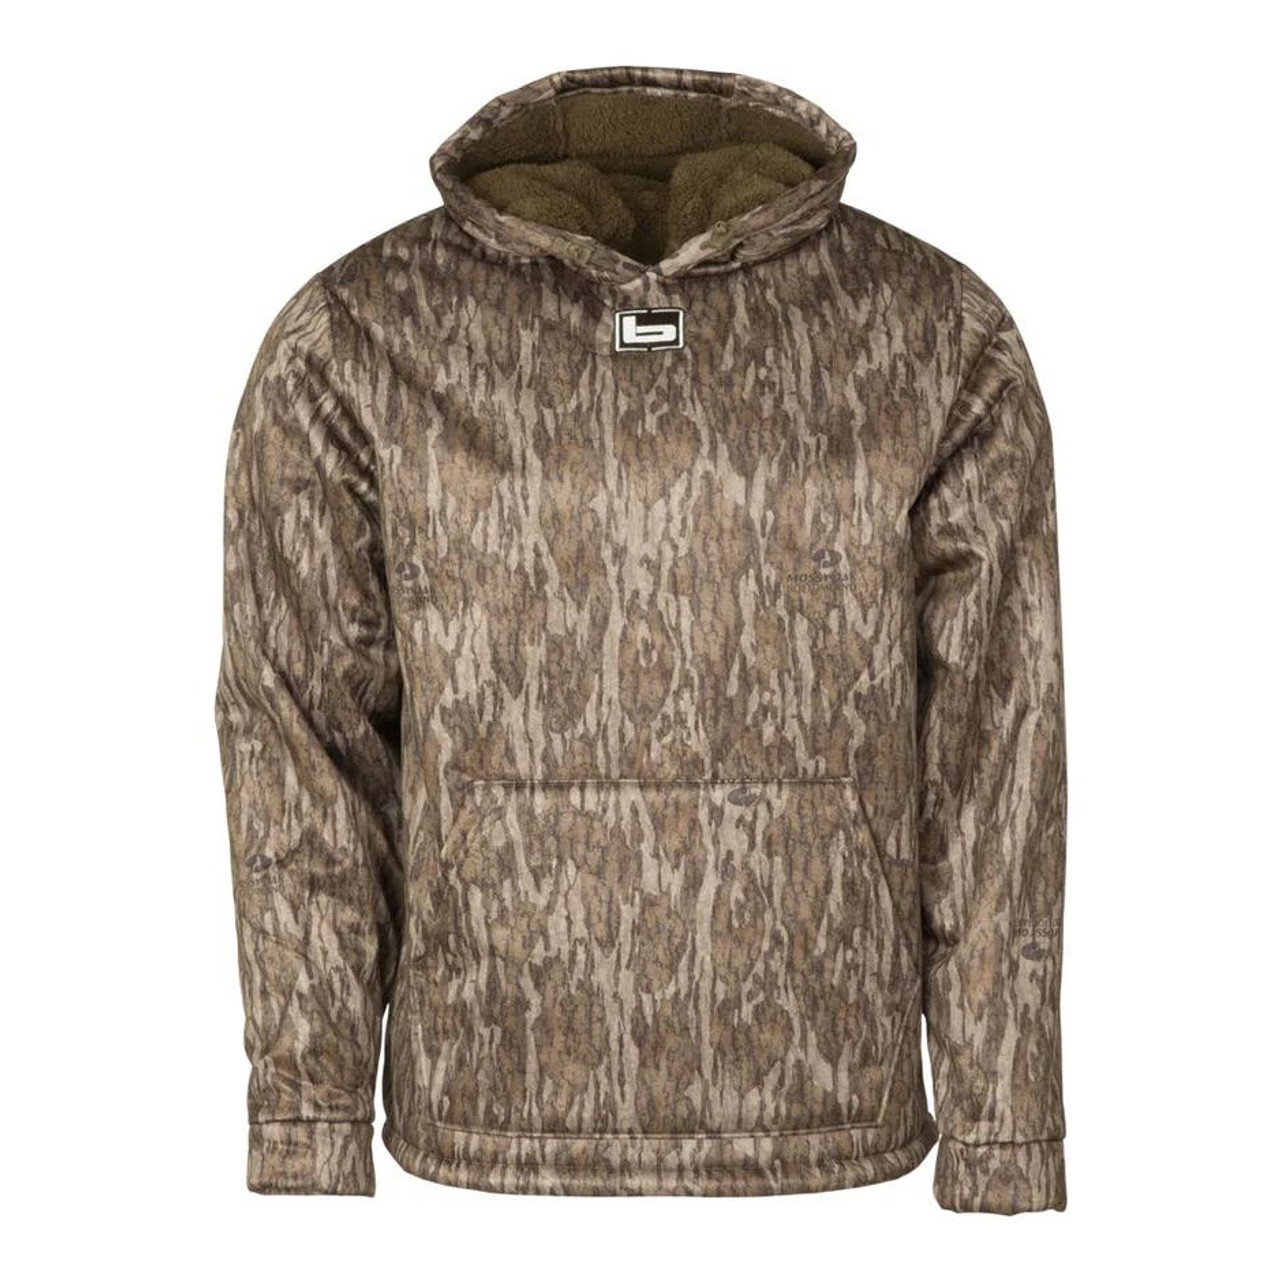 https://cdn11.bigcommerce.com/s-70mih4s/images/stencil/1280x1280/products/23237/63812/Banded-Atchafalaya-Pullover-Mossy-Oak-Bottomland-FAMILY6786_image1__81004.1700935798.jpg?c=2